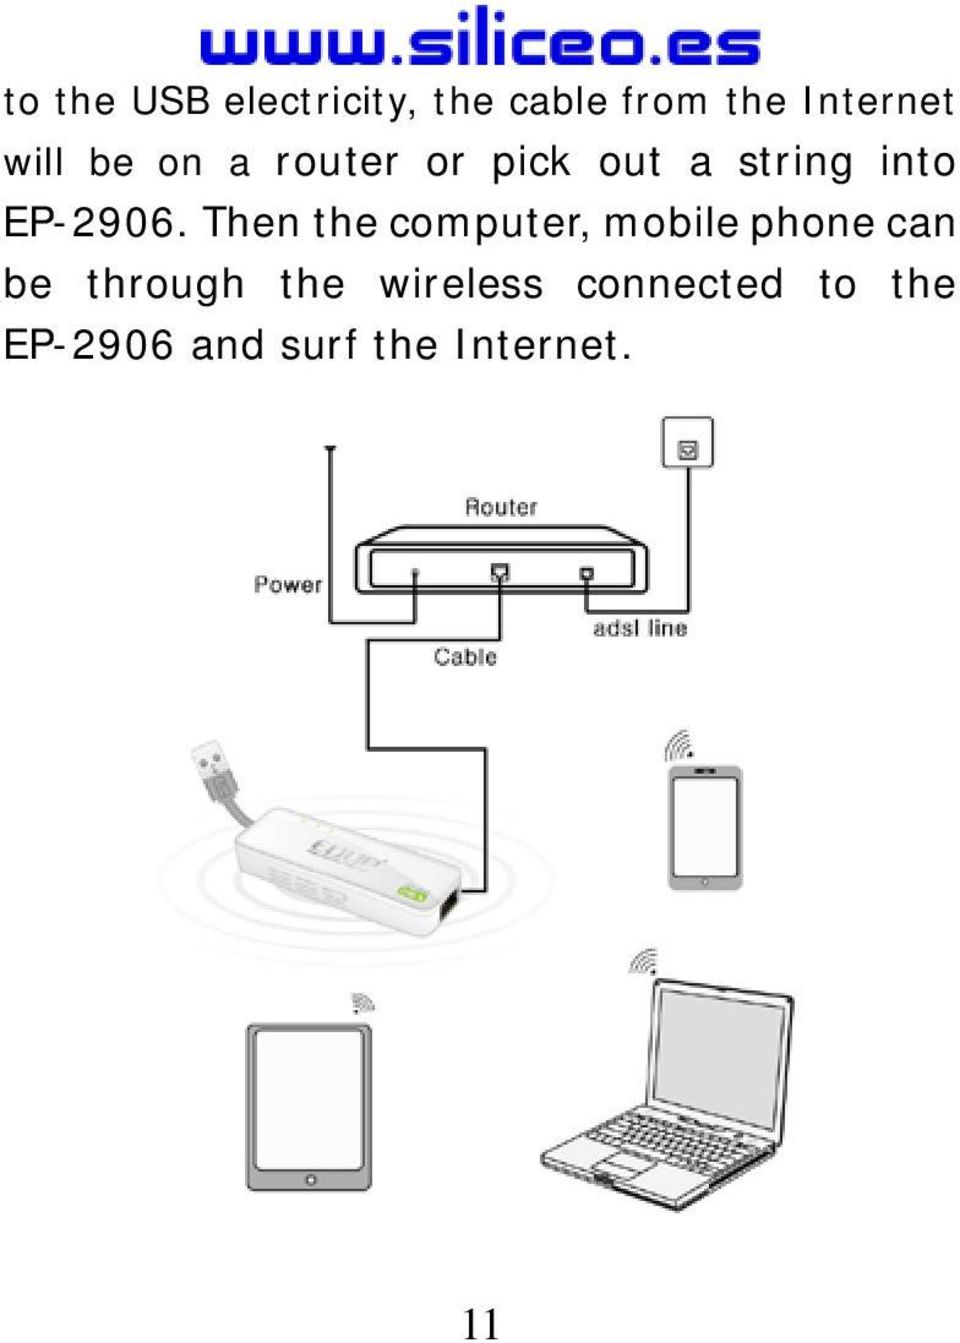 Then the computer, mobile phone can be through the